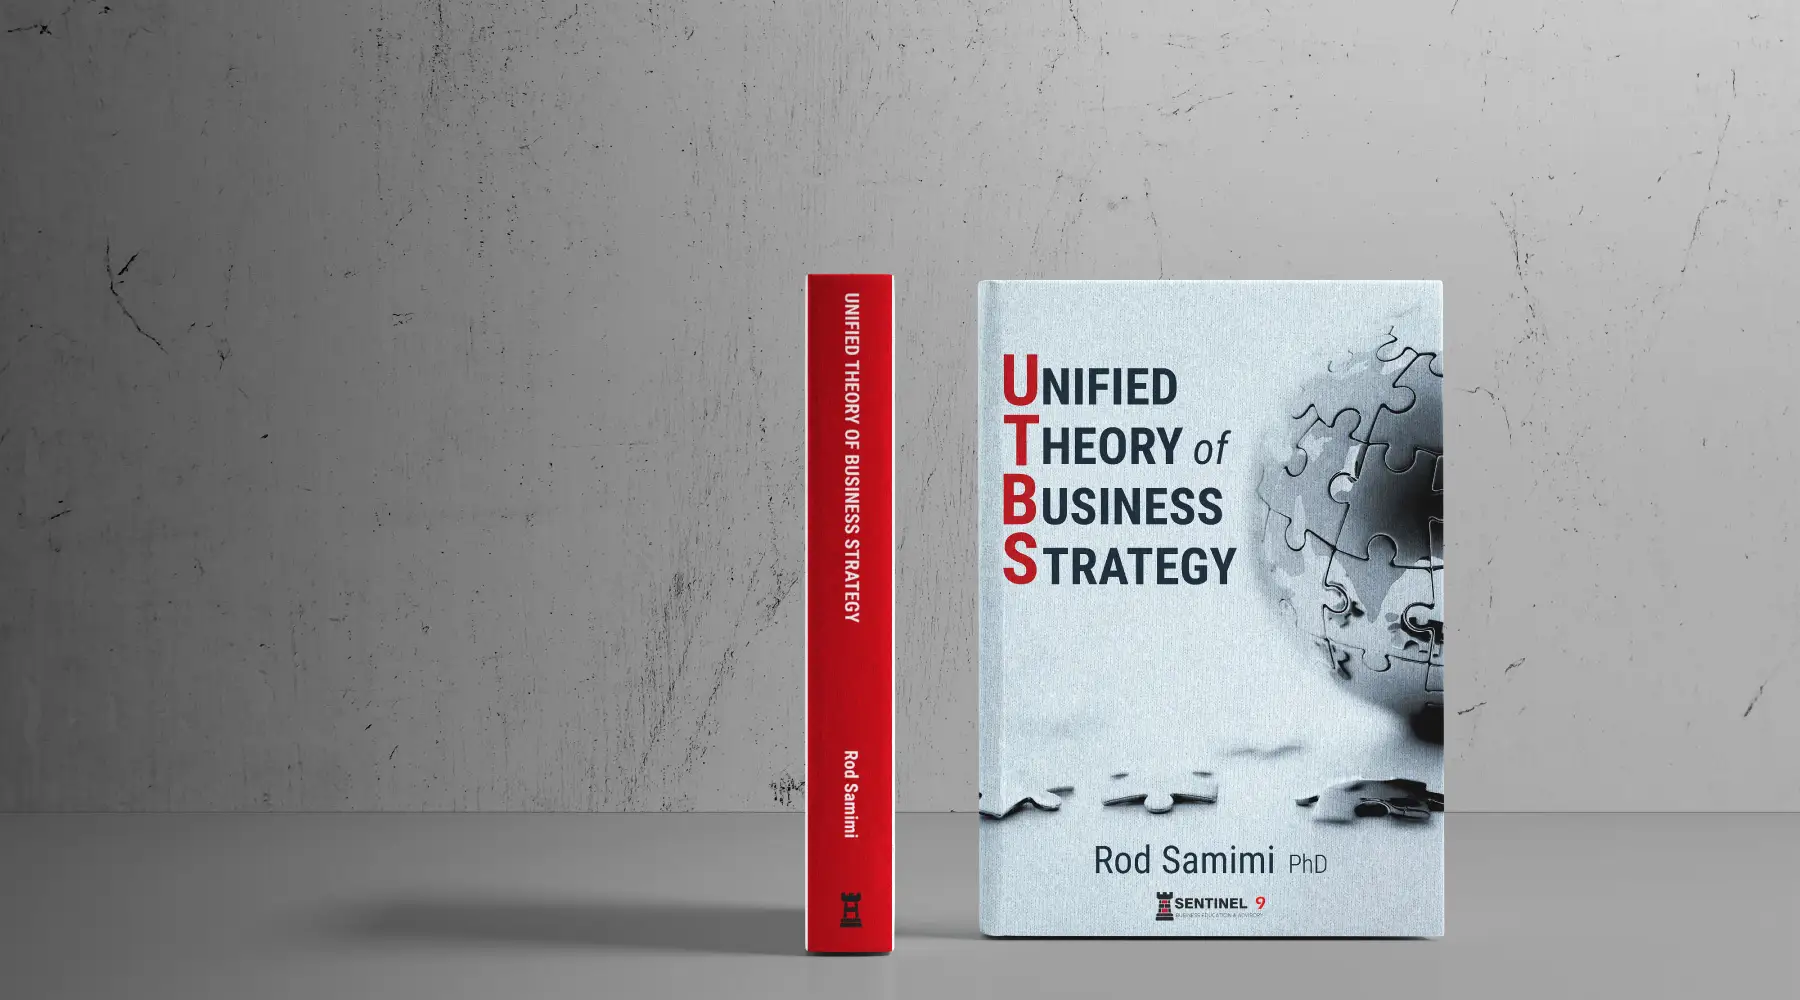 The Unified Theory of Business Strategy